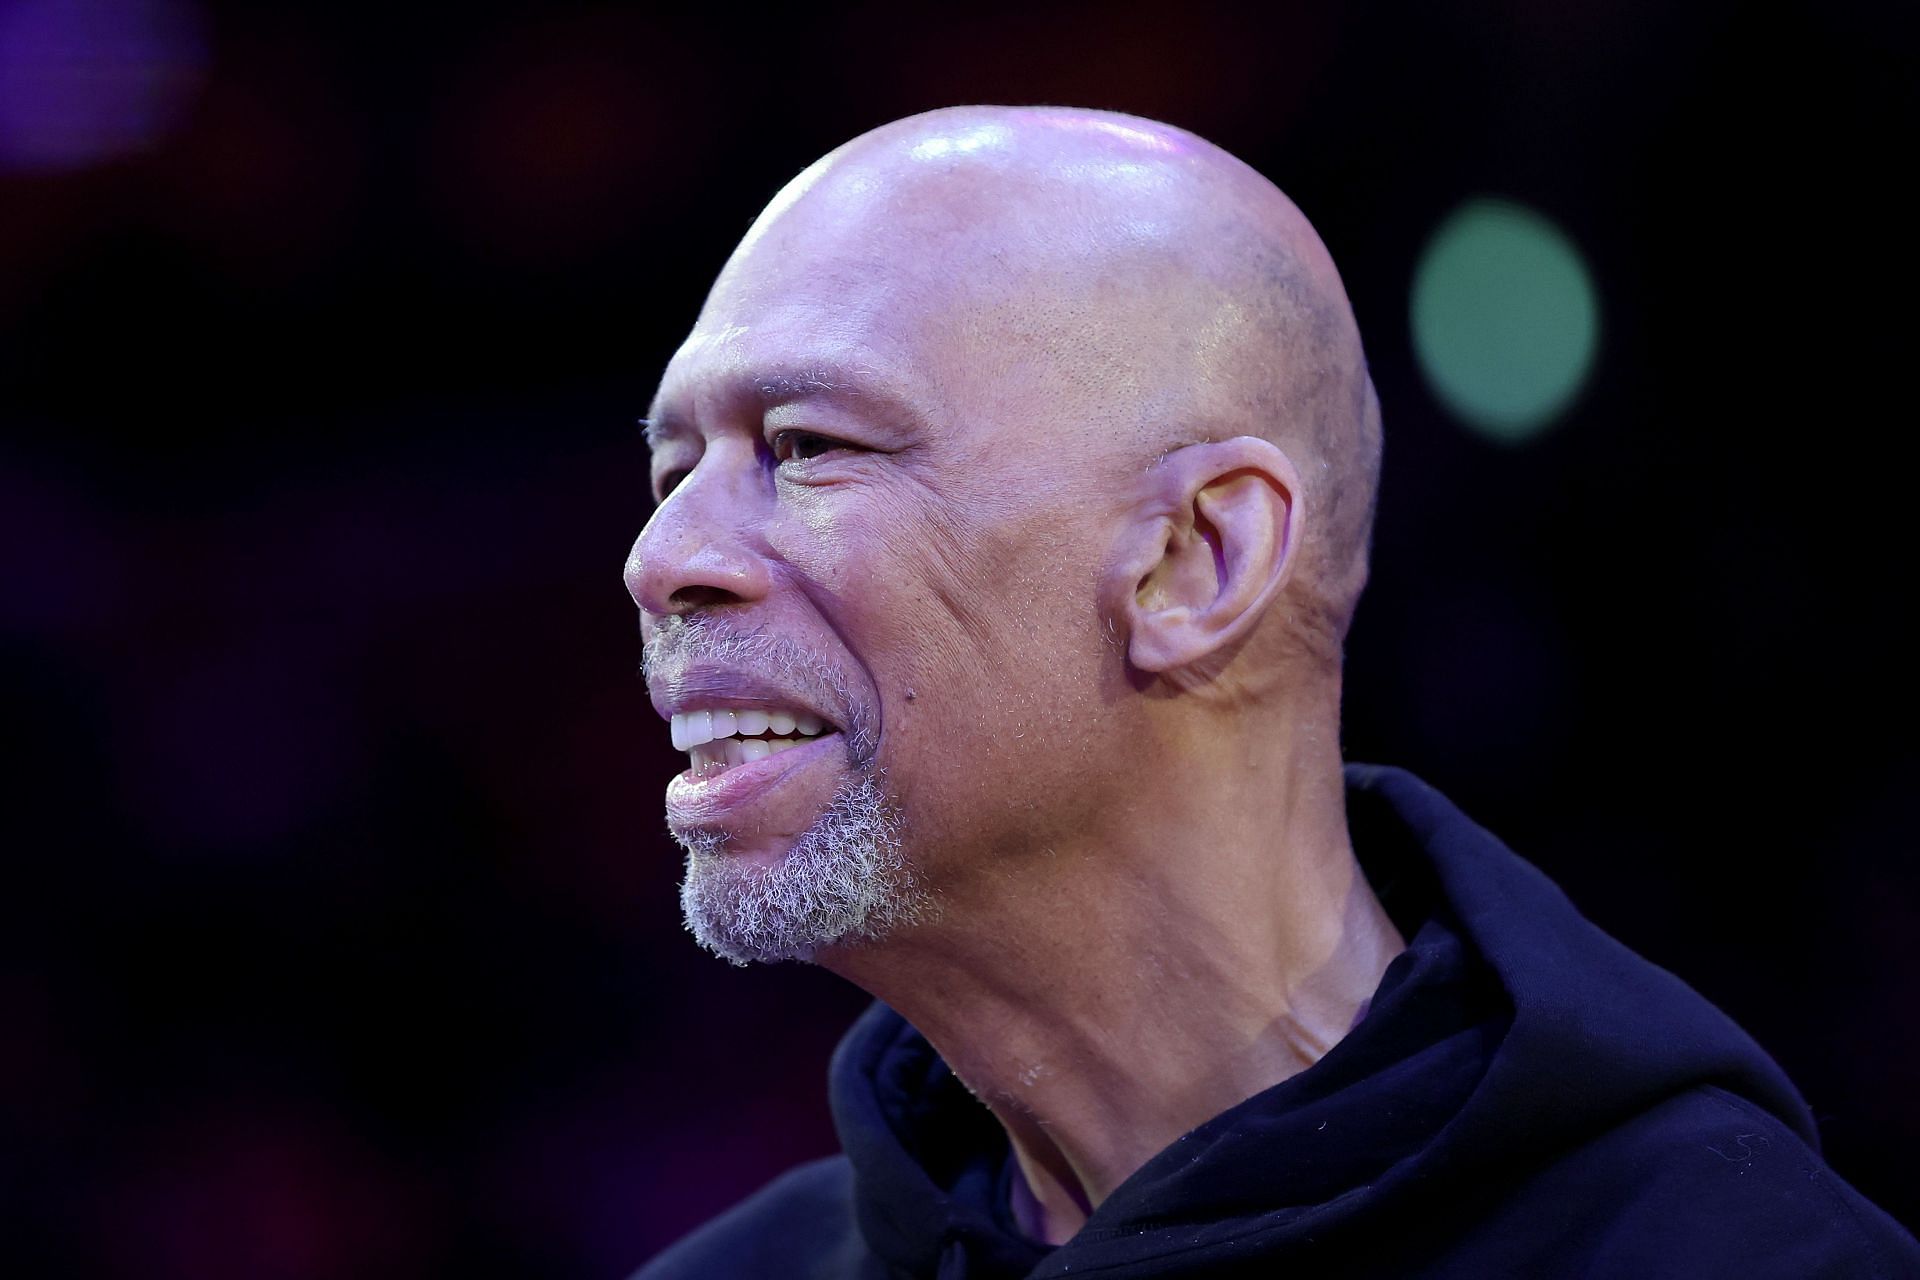 Kareem Abdul-Jabbar has felt a sense of relief that LeBron James will eventually hold the all-time scoring record.